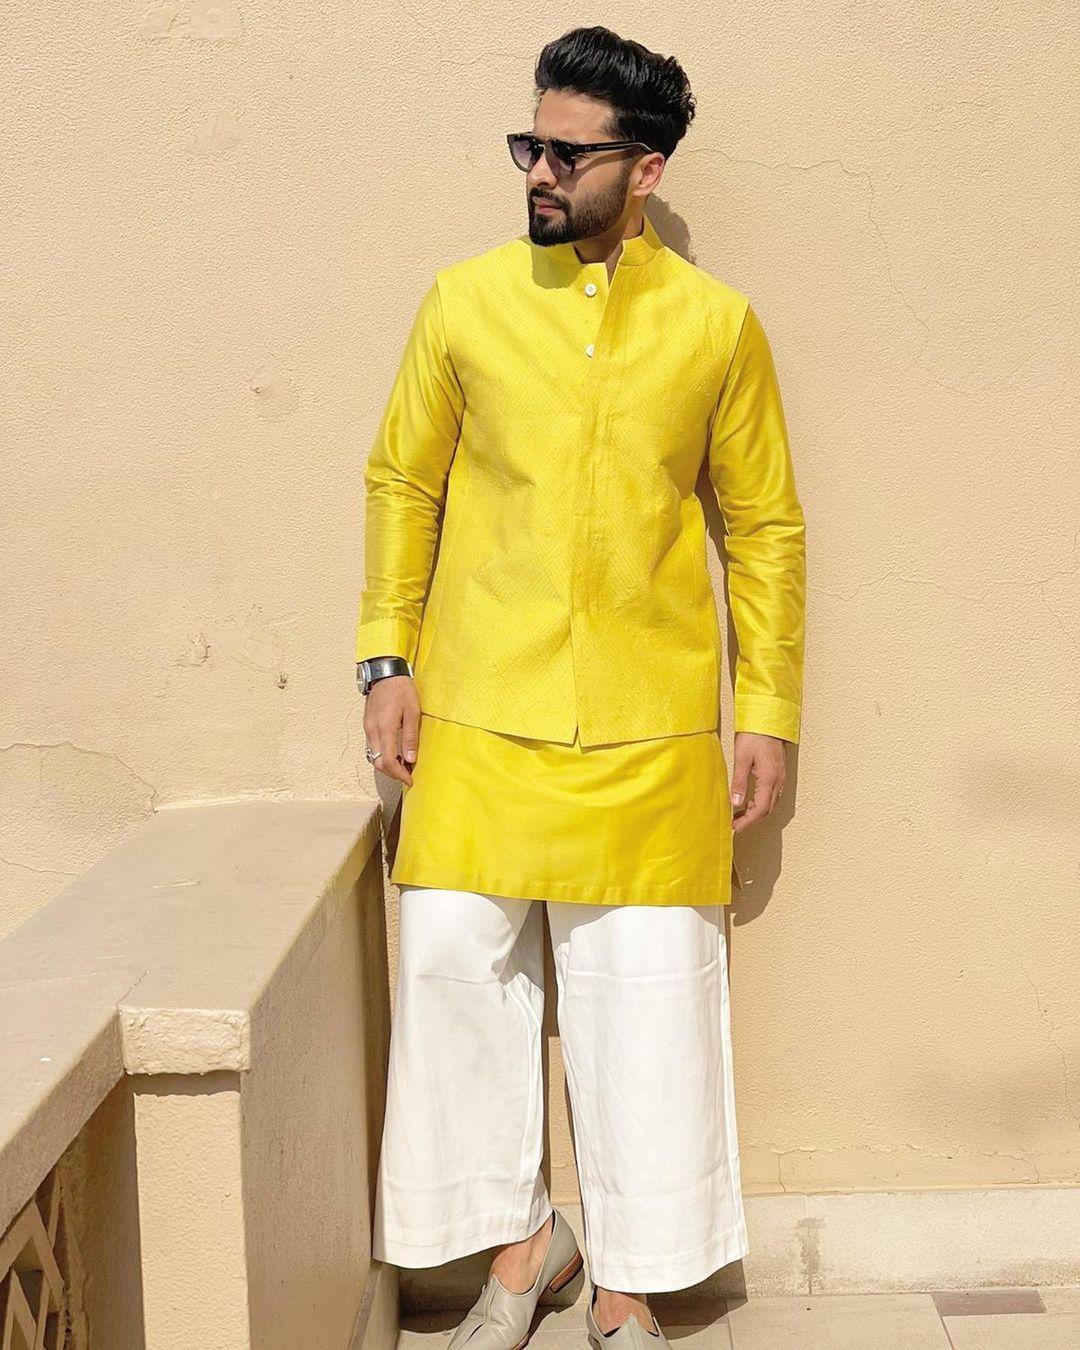 Jackky Bhagnani is currently in the spotlight for his upcoming wedding with actress Rakul Preet Singh. Beyond his acting prowess, he's catching attention for his impeccable traditional fashion sense. In a recent look, the groom-to-be donned a refreshing yellow kurta paired with a matching jacket and white pyjama